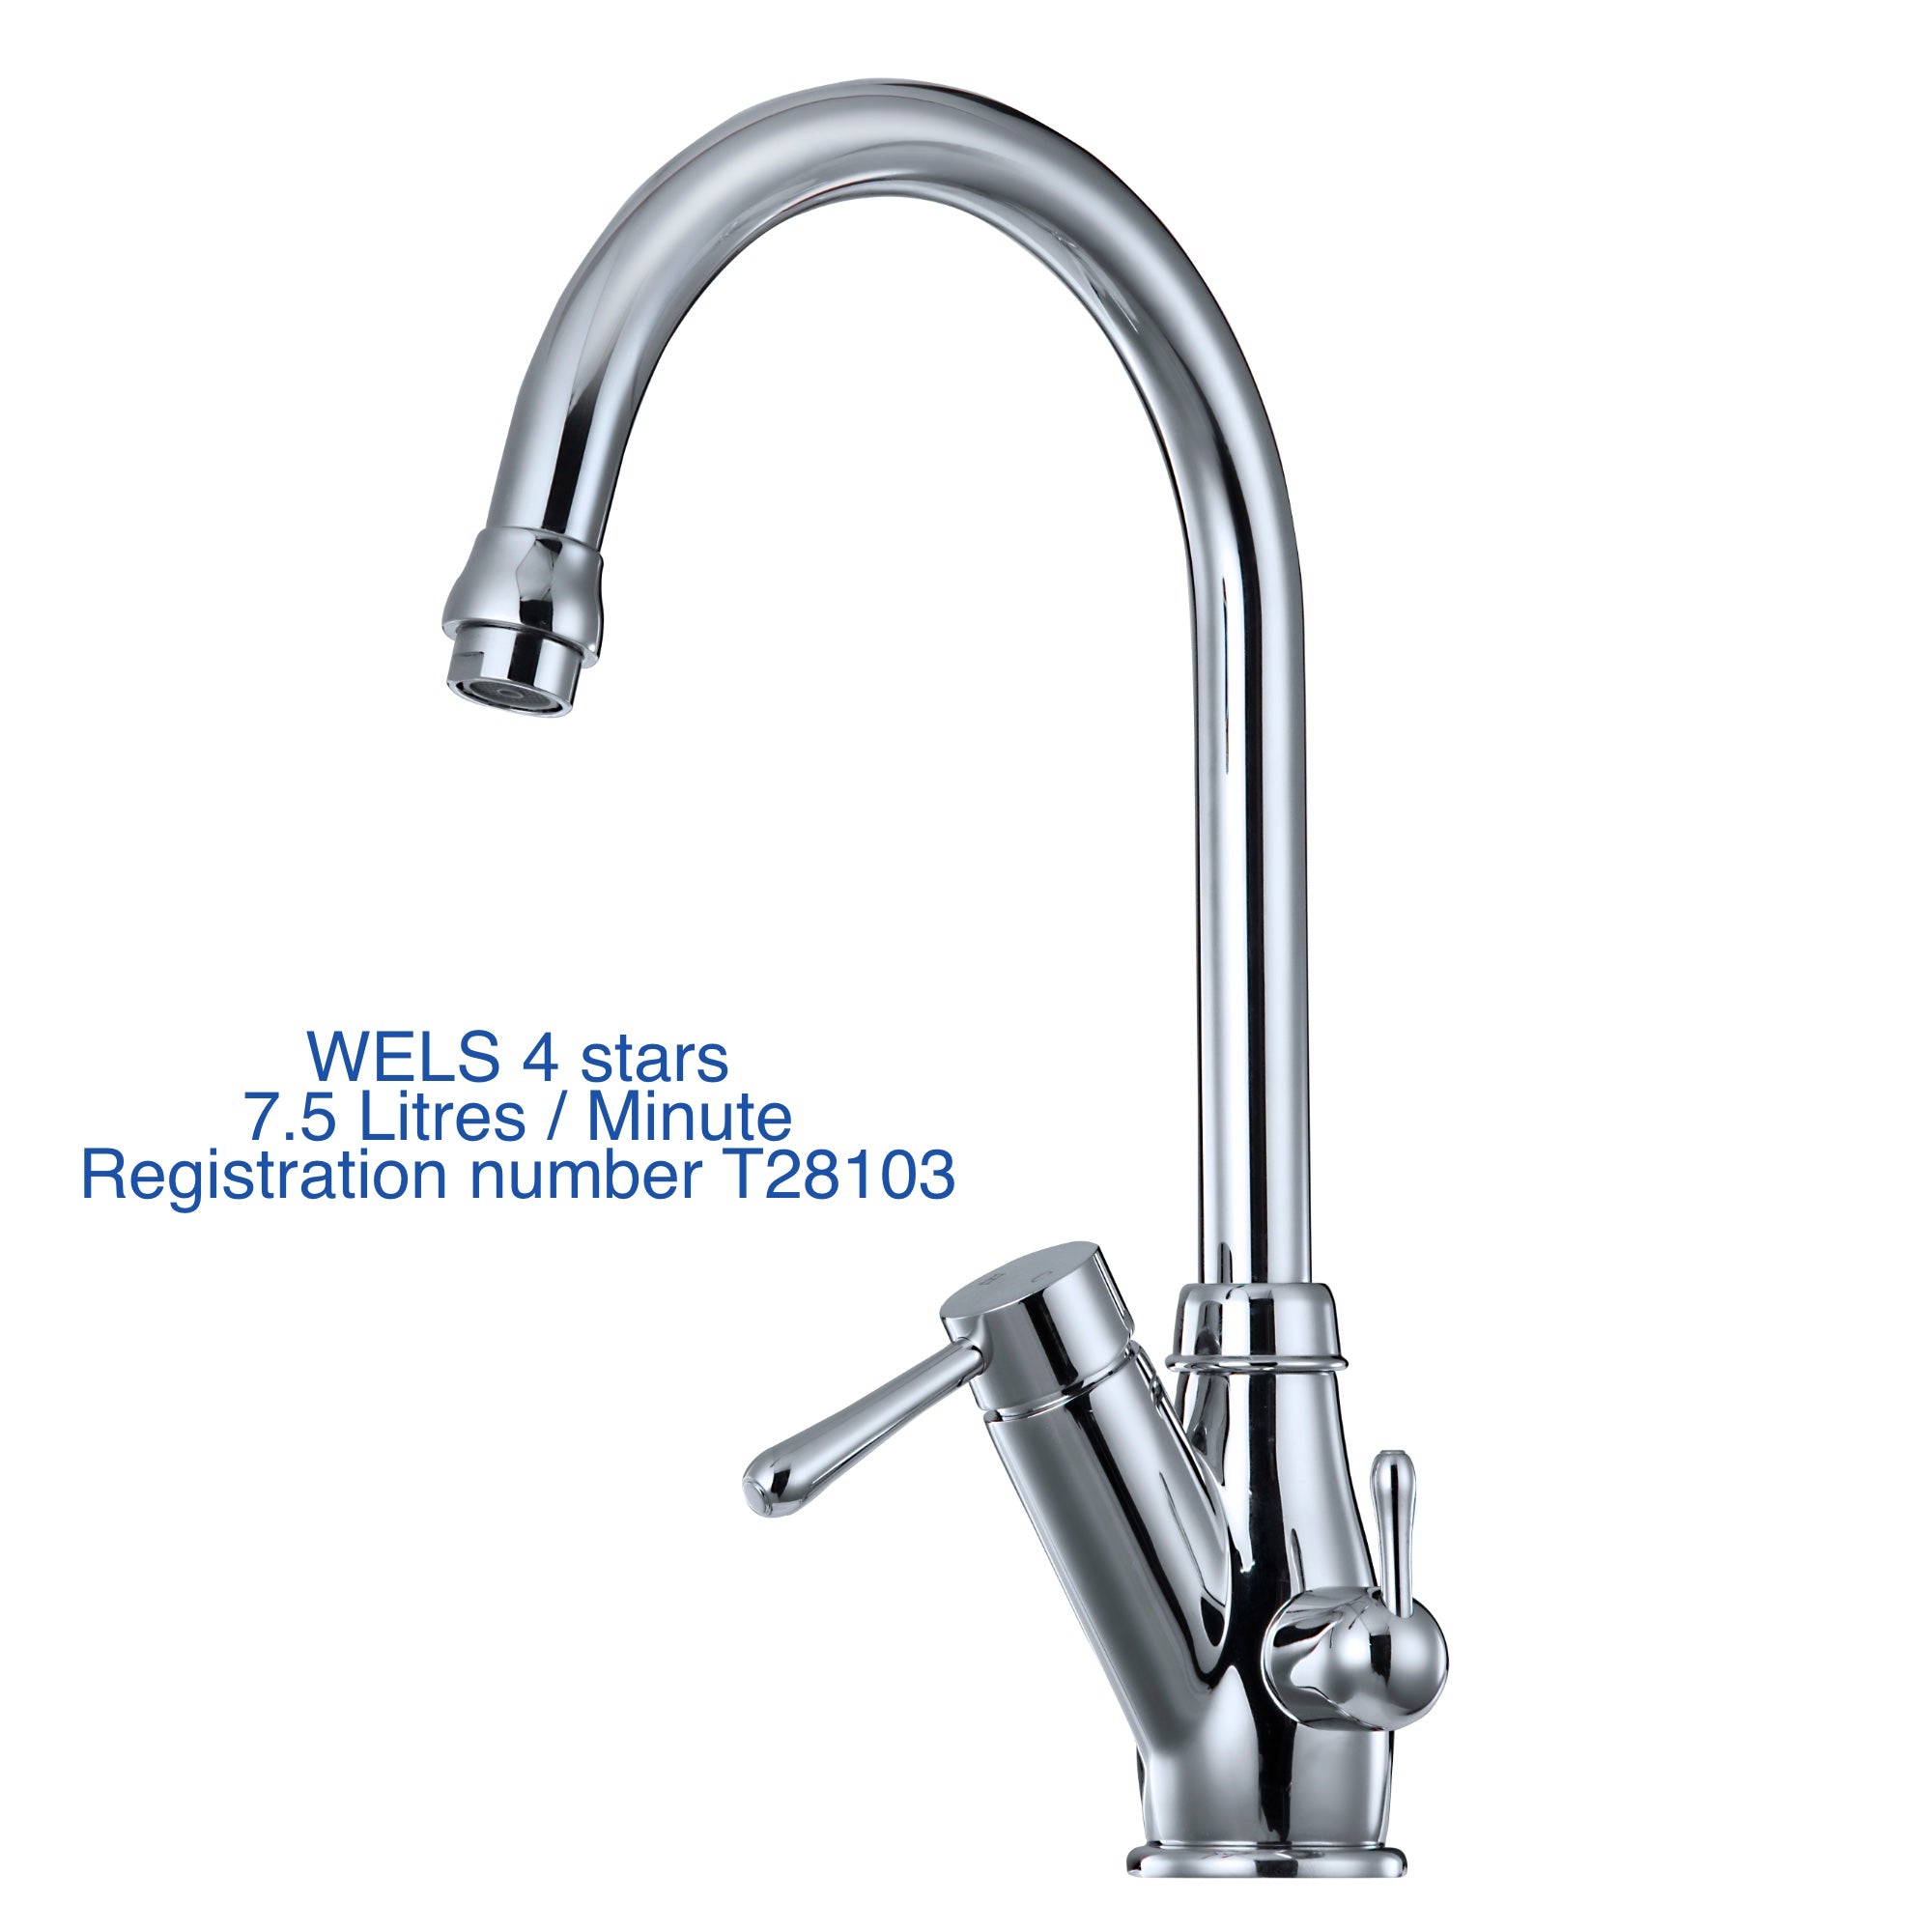 3 way water filter faucet / kitchen mixer tap hot cold and filtered water